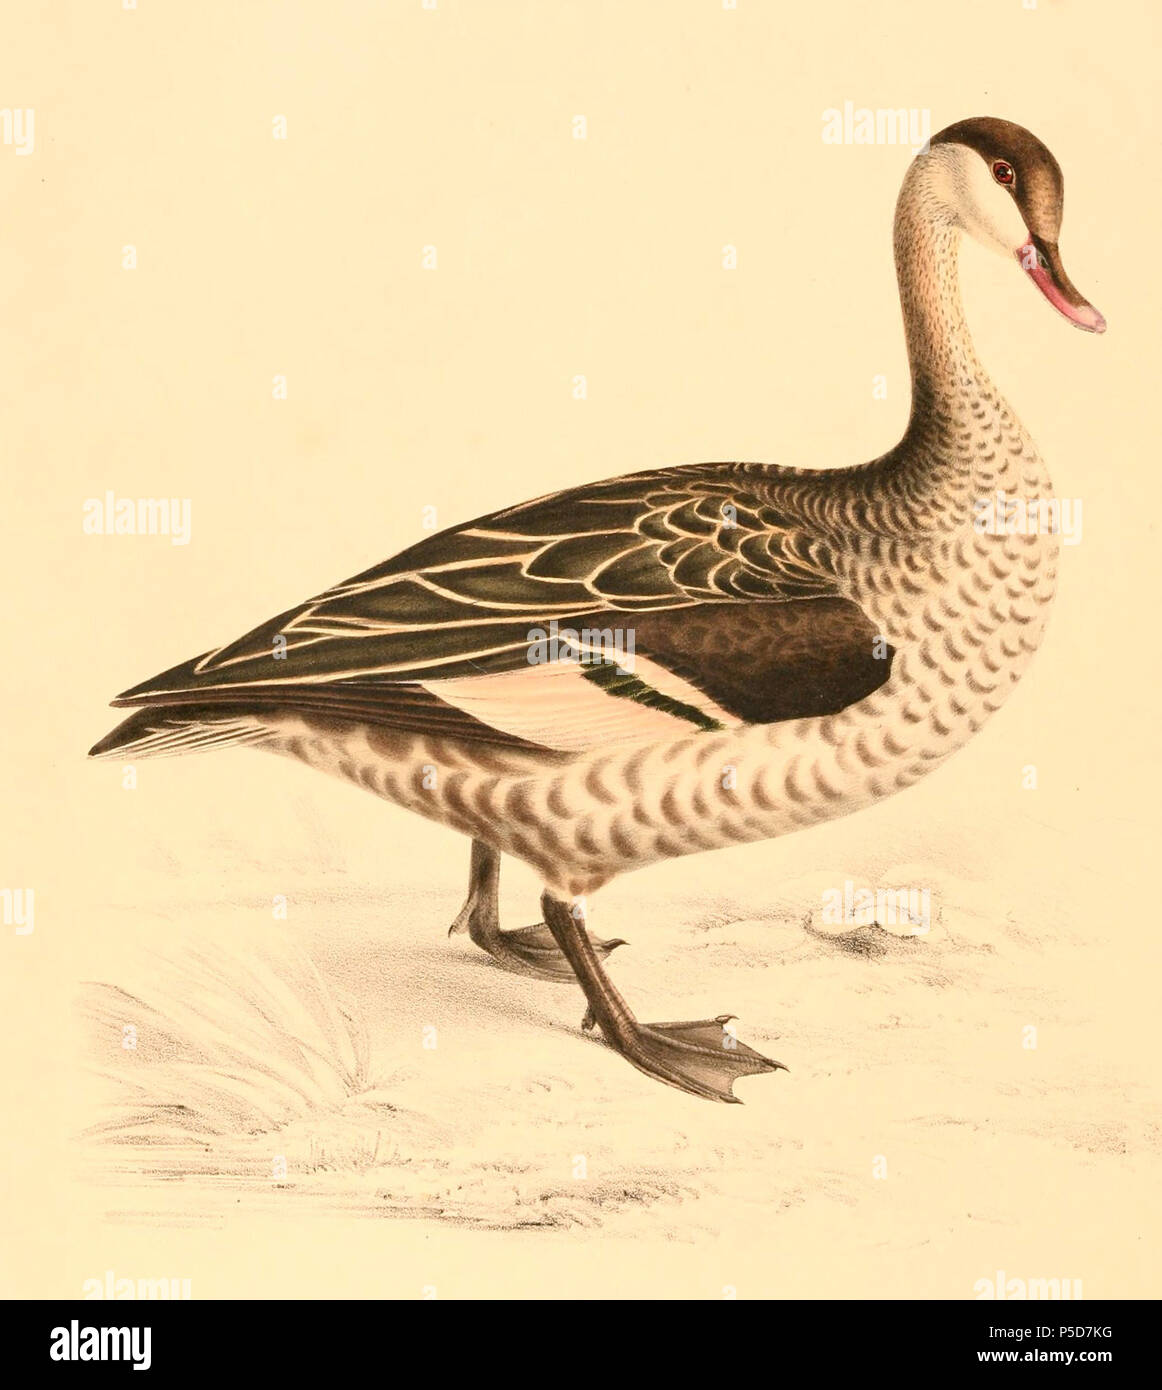 N/A. English: « Poecilonitta erythrorhyncha » = Anas erythrorhyncha (Red-billed Teal) - male Français : « Poecilonitta erythrorhyncha » = Anas erythrorhyncha (Canard à bec rouge) - mâle . 1838.   Andrew Smith  (1797–1872)      Alternative names Smith  Description Scottish biologist, physician, zoologist, ornithologist, naturalist and surgeon  Date of birth/death 3 December 1797 11 August 1872  Location of birth/death Hawick London  Authority control  : Q507606 VIAF:22151719 ISNI:0000 0000 8100 6105 LCCN:nr90010813 Open Library:OL1923590A Oxford Dict.:25772 WorldCat 97 Anas erythrorhyncha 1838 Stock Photo